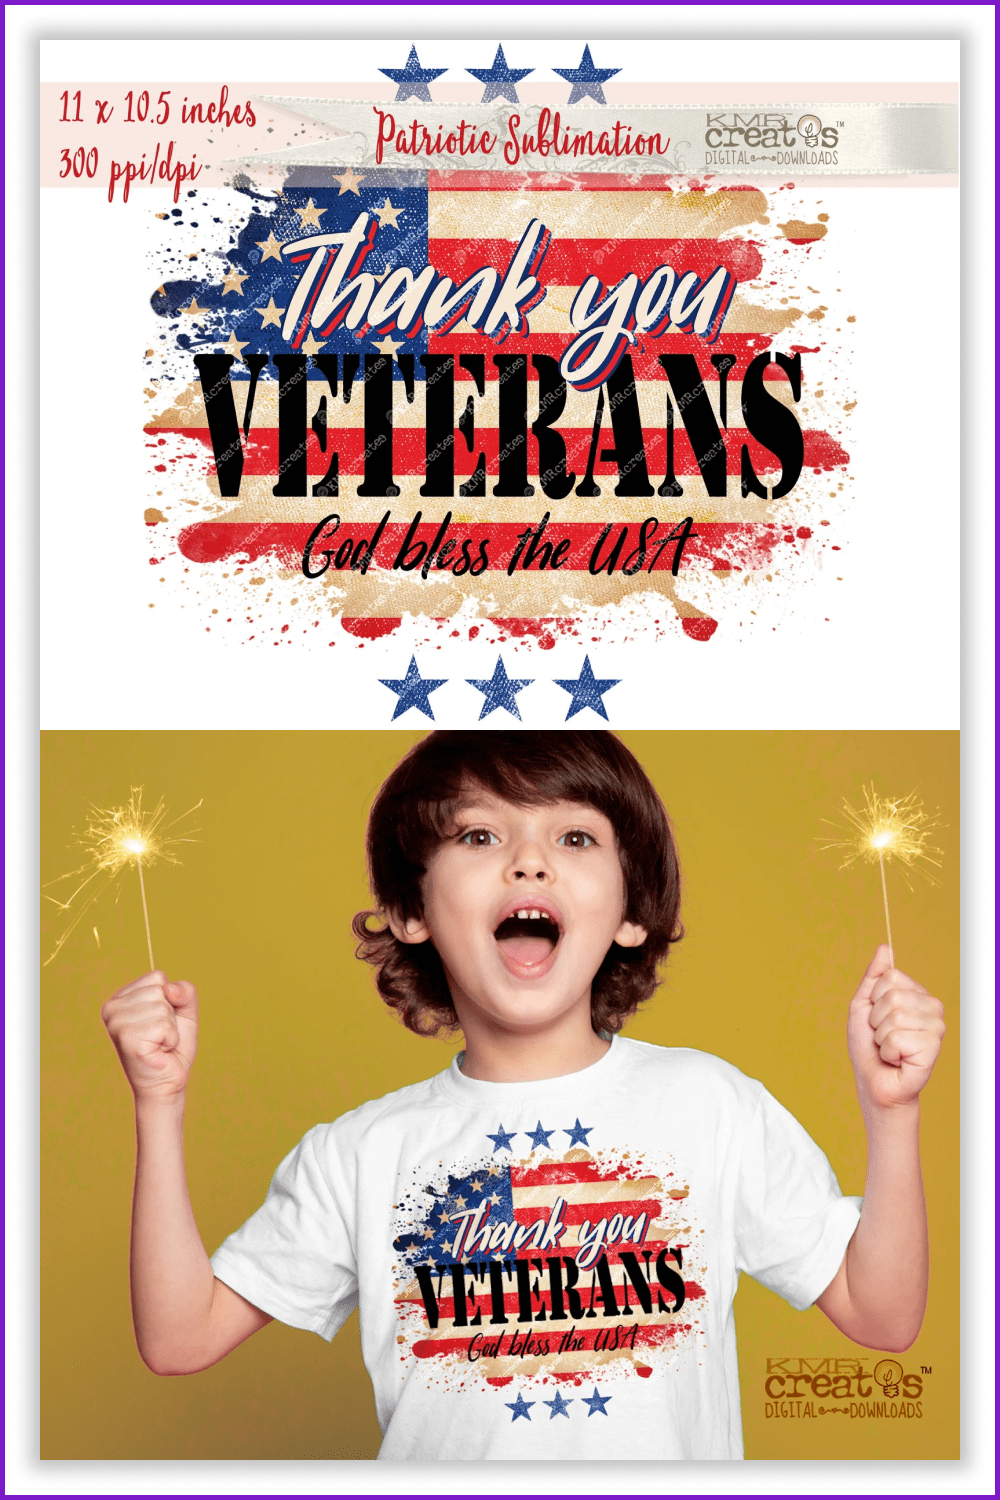 Collage of american flag and lettering and boy in white t-shirt.